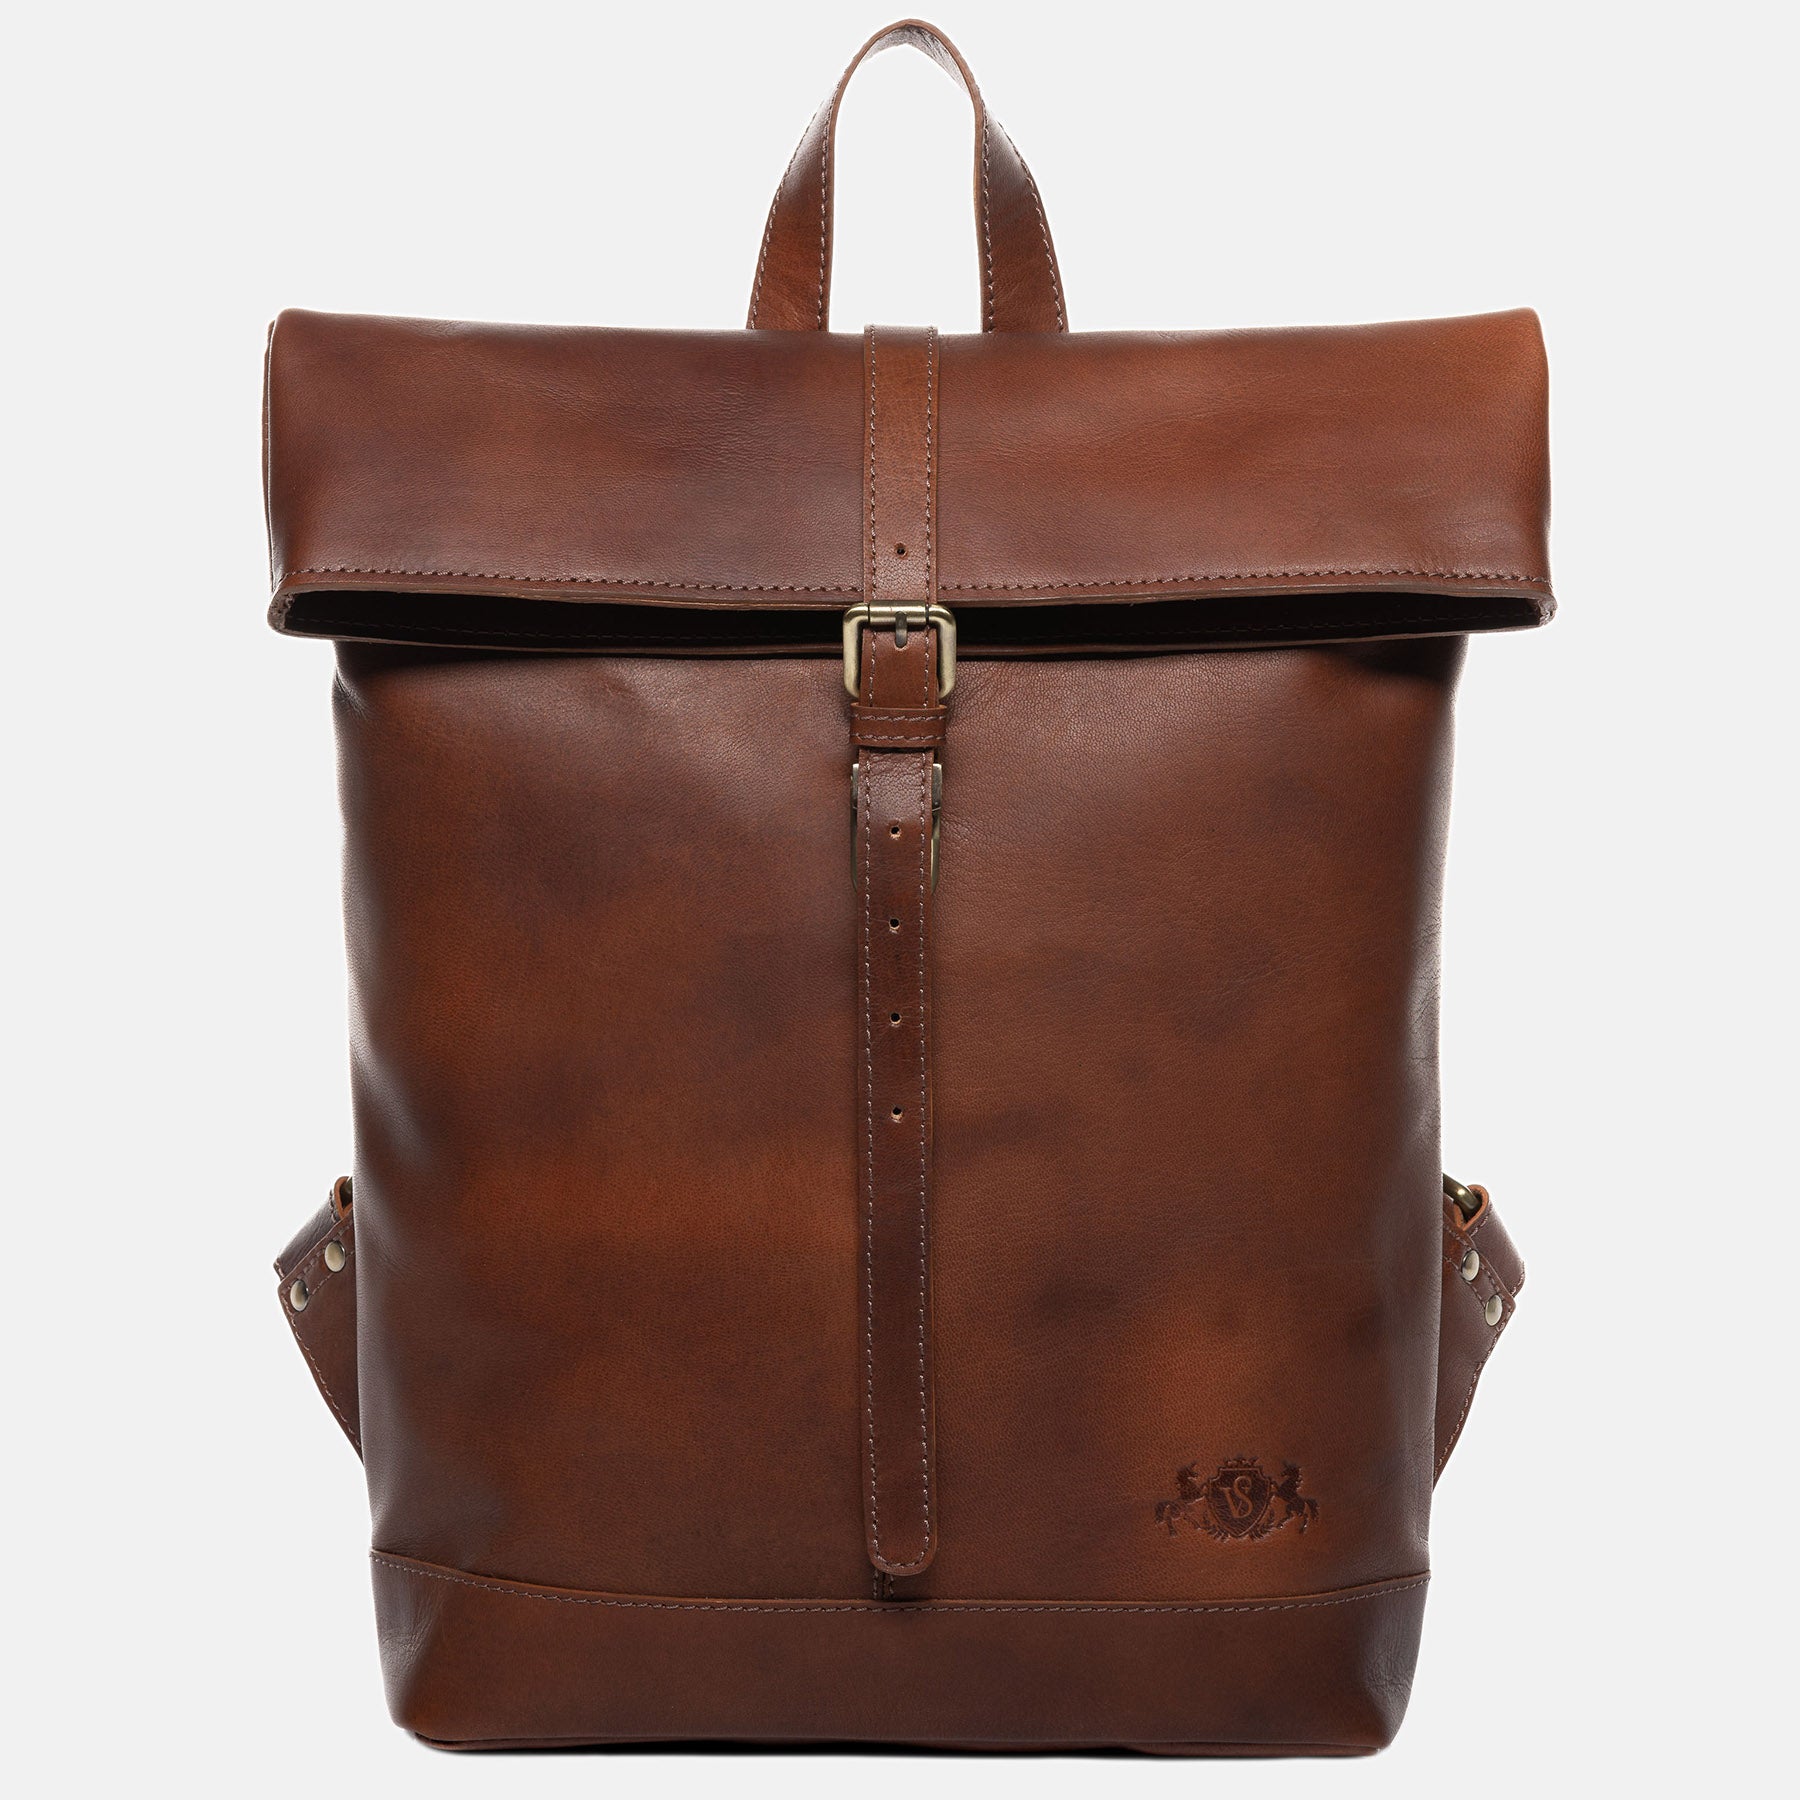 Rolltop backpack JAY smooth leather light brown